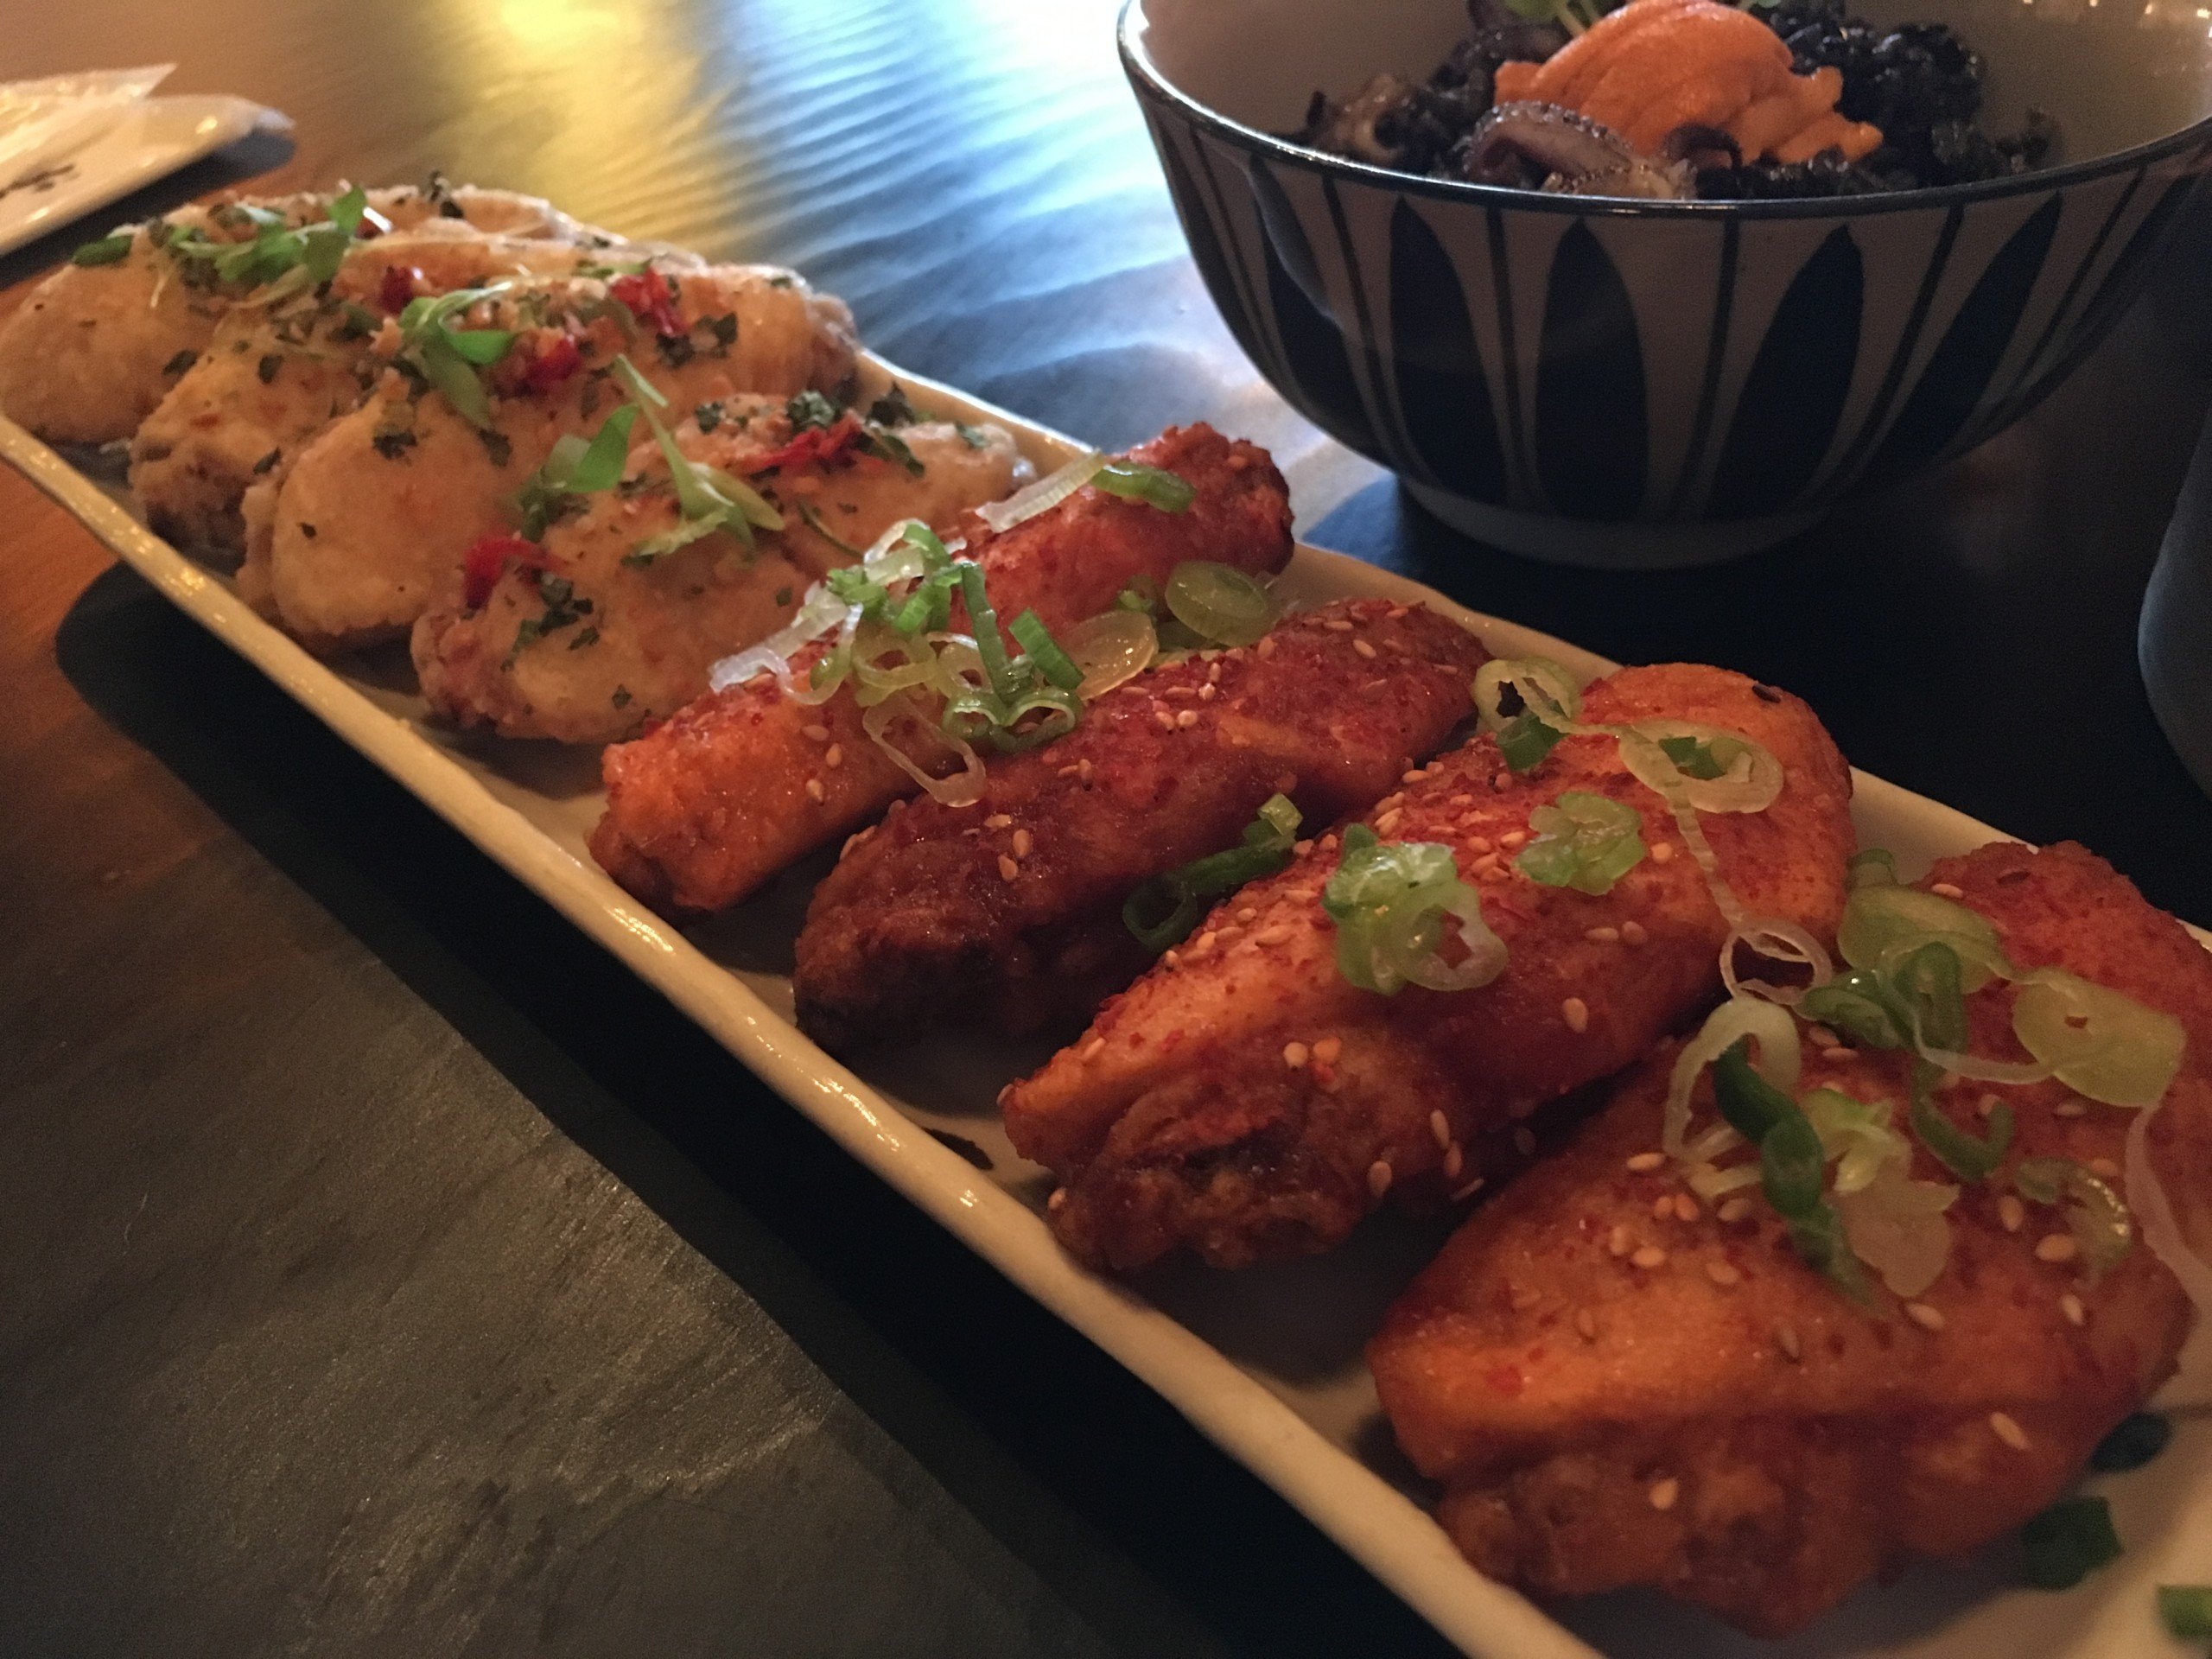 Inyo offers three types of chicken wings - Japanese Tebasaki, Korean Gochugaru and Thai Chile. We opted for the Korean and Thai. Big, meaty, mashiso and aroi mak. ($4.99 or $2.99 during Happy Hour)